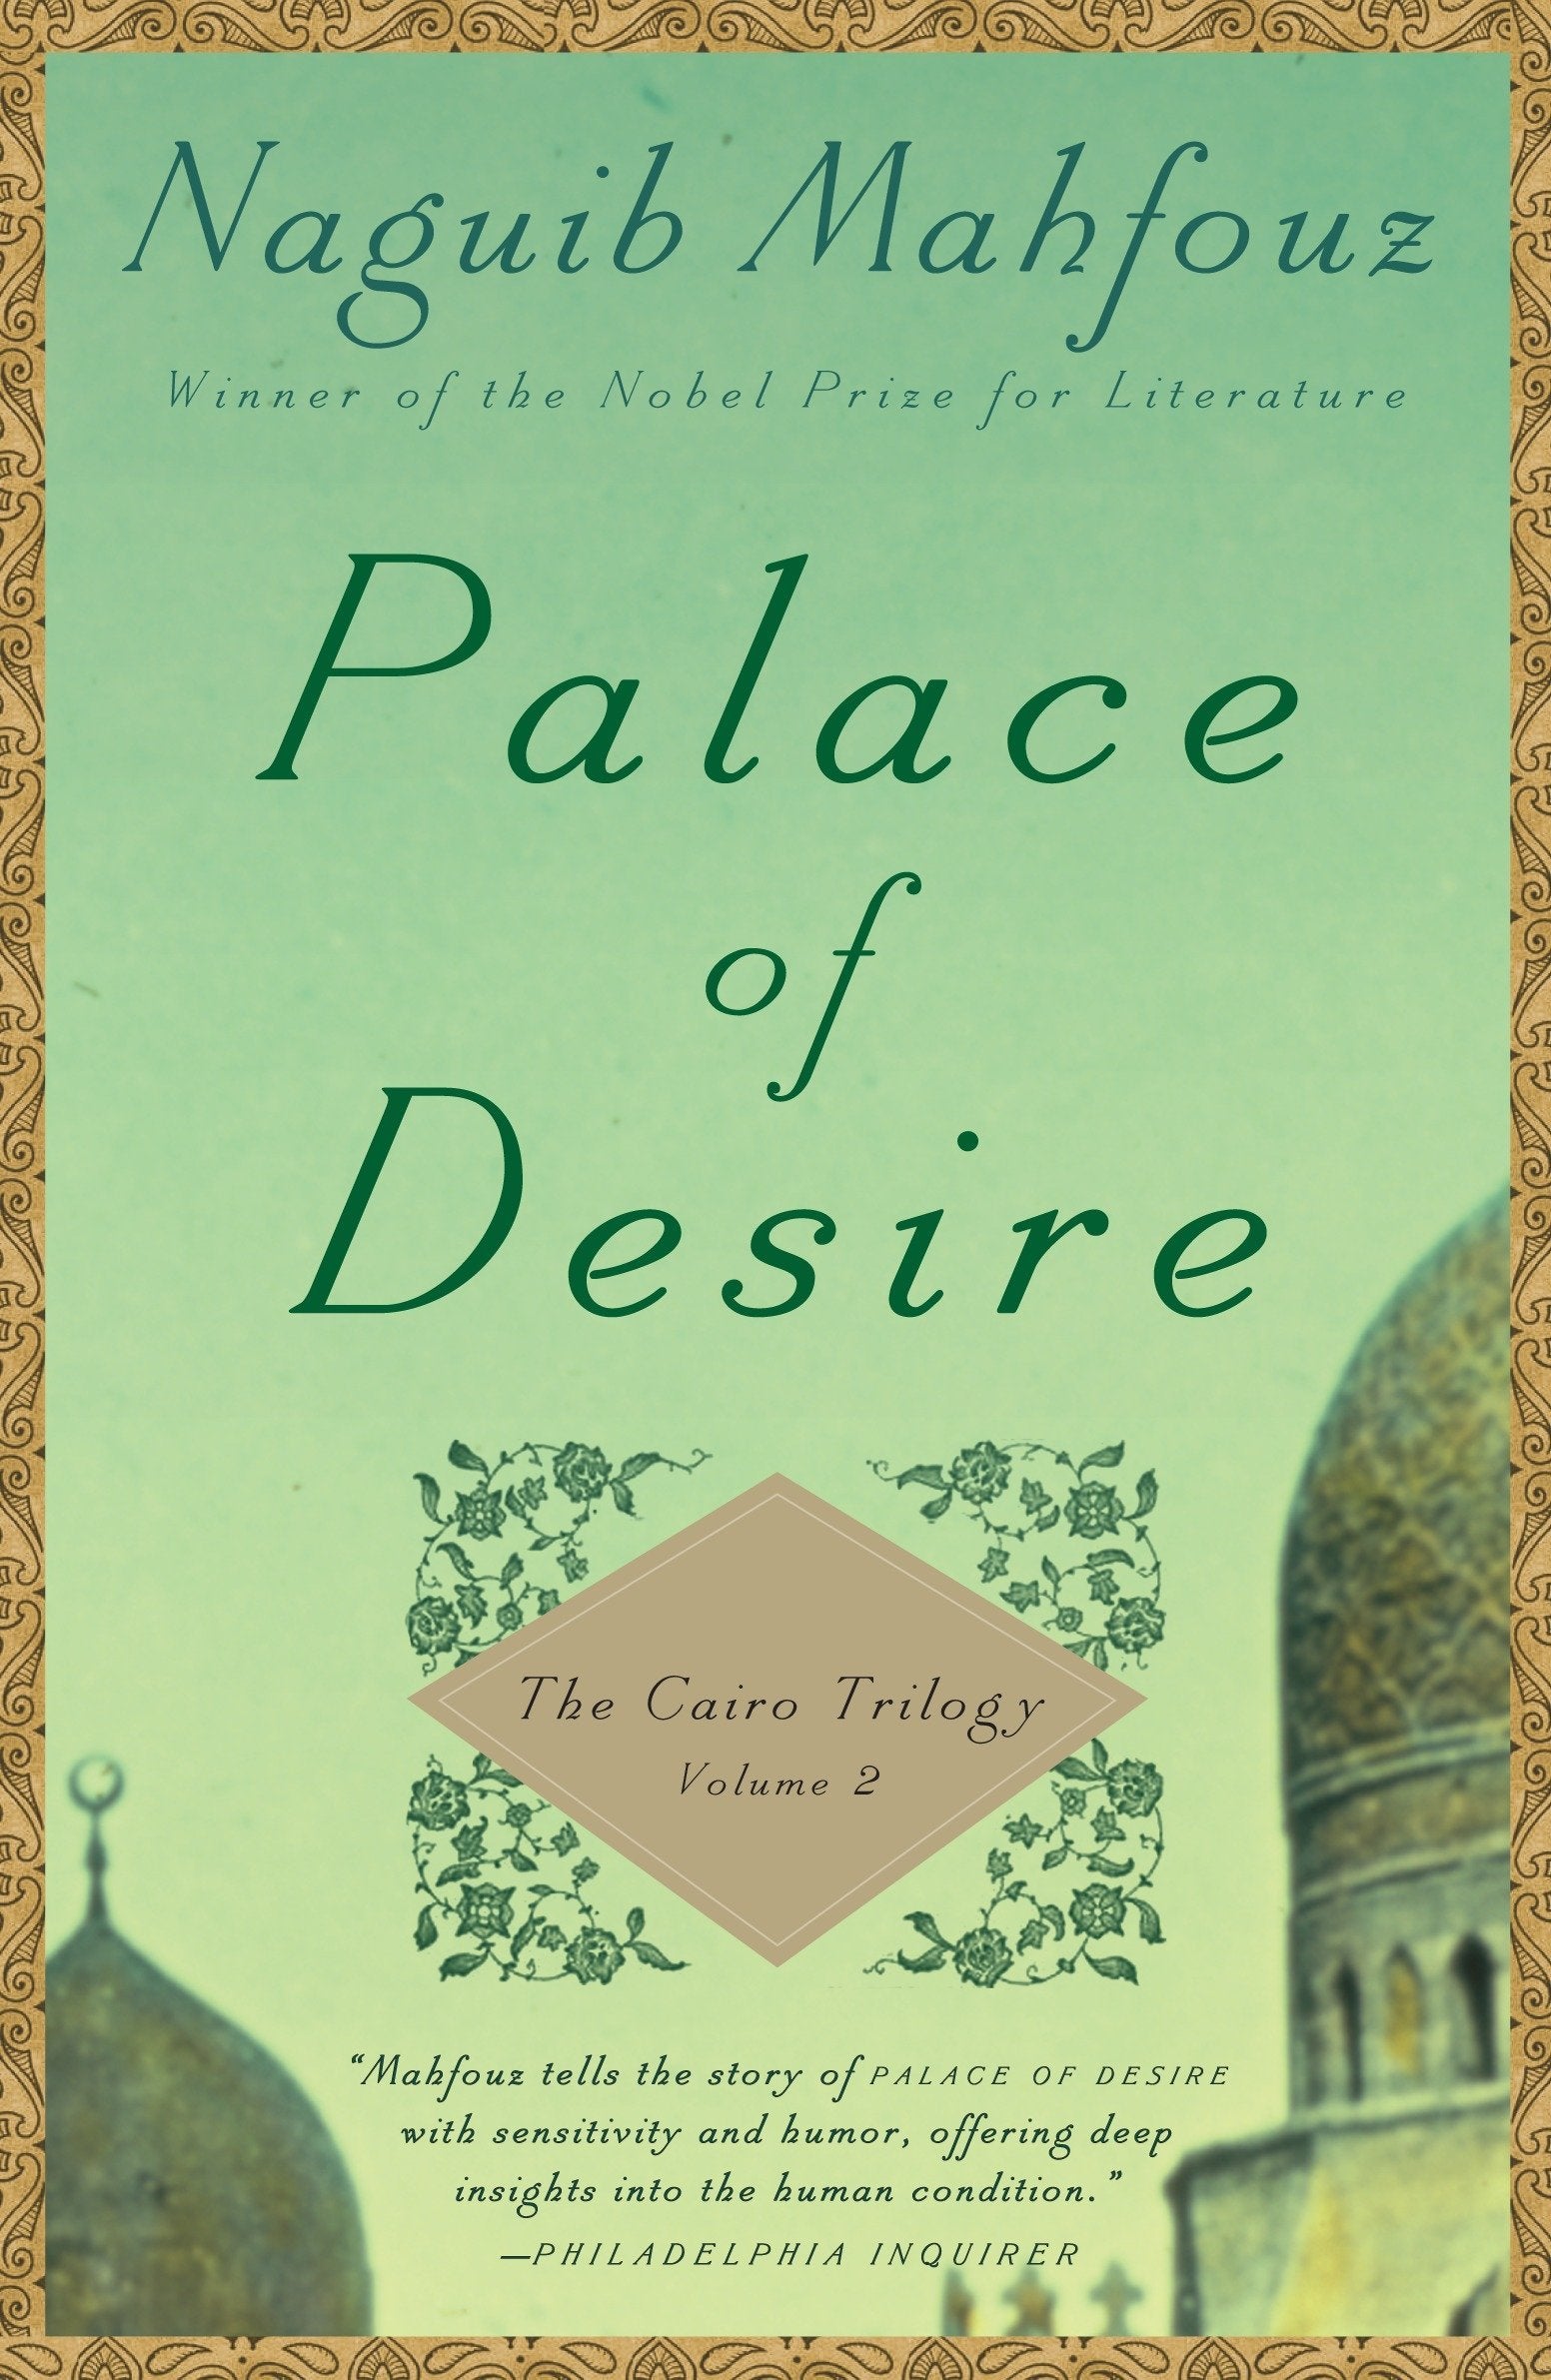 Palace of Desire: The Cairo Trilogy - Volume 2